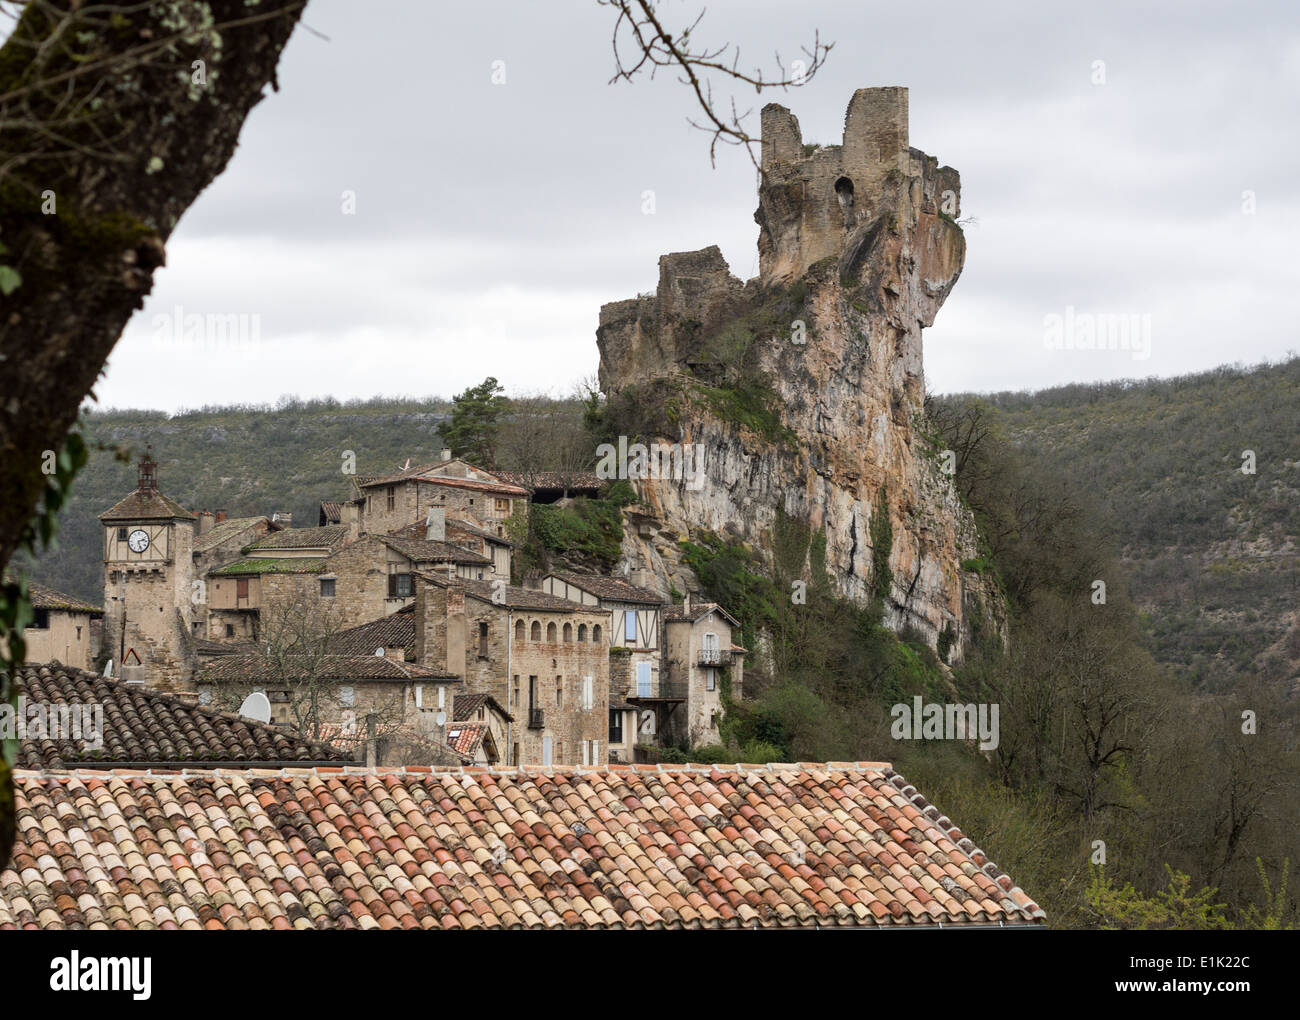 Rocky Perched Castle in Penne. Penne Perched above the modern town is the ancient fortification built on a vertical rock face. Stock Photo